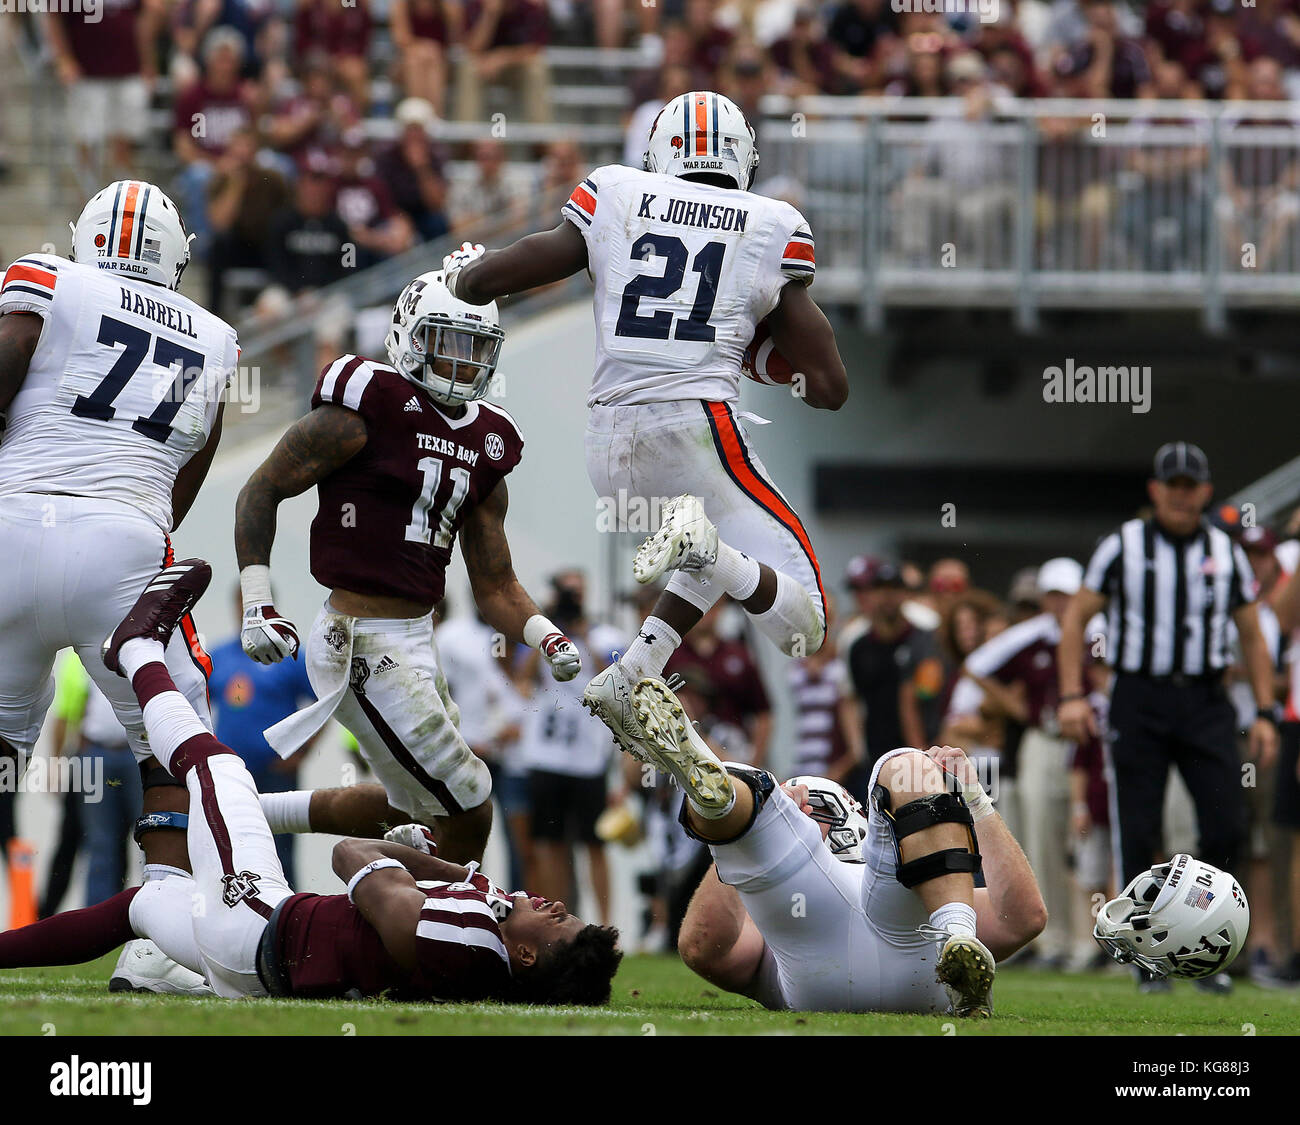 November 4, 2017: Auburn Tigers running back Kerryon Johnson (21) leaps over a defender in the third quarter during the NCAA football game between the Auburn Tigers and the Texas A&M Aggies at Kyle Field in College Station, TX; John Glaser/CSM. Stock Photo